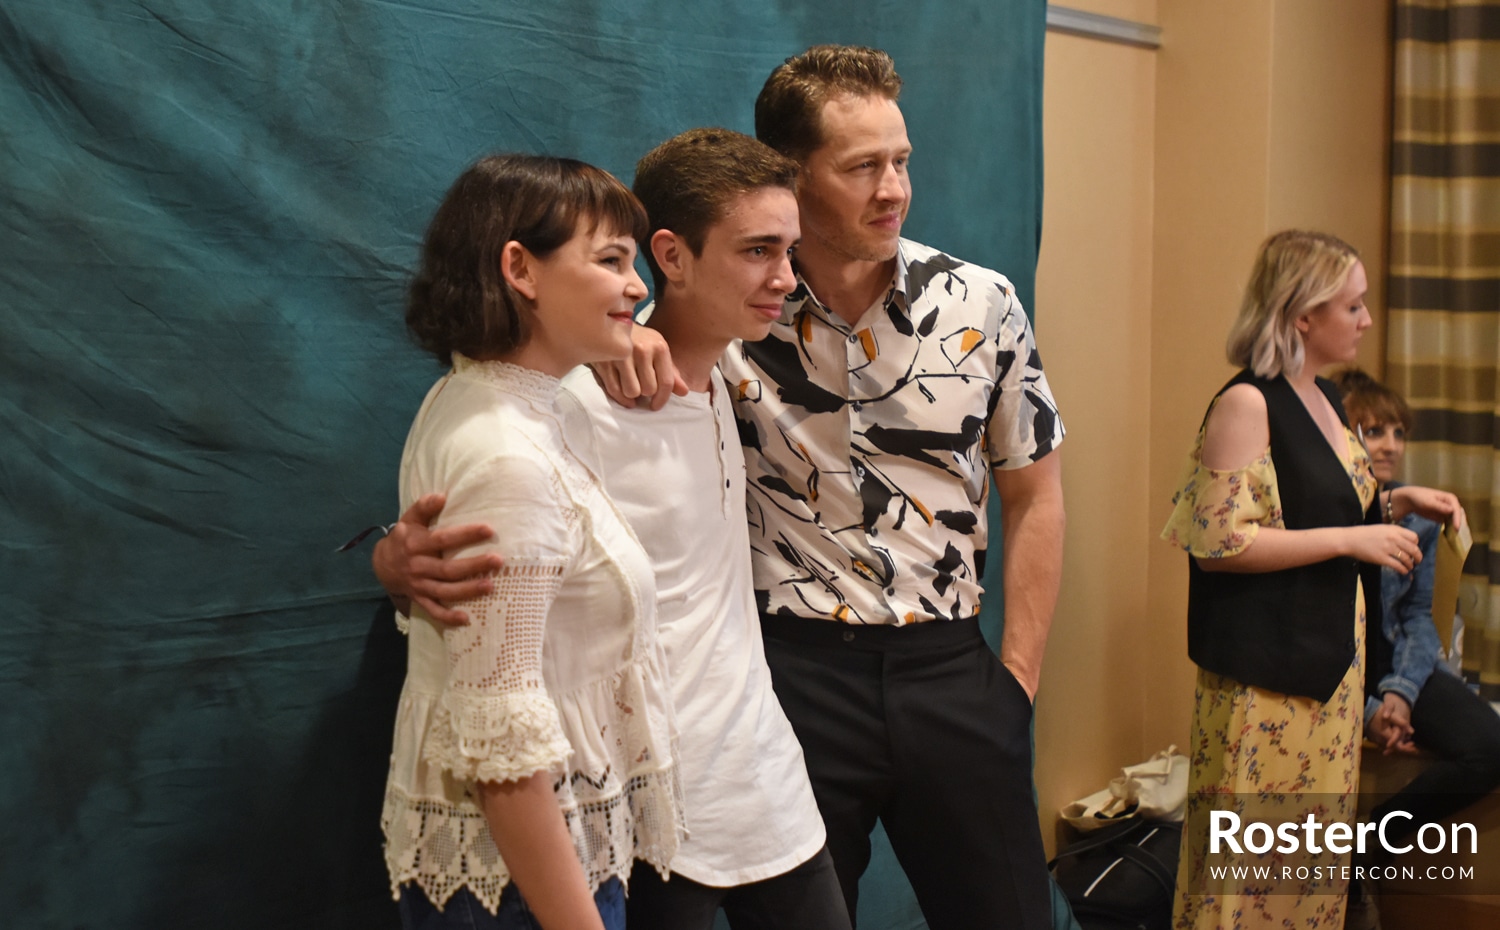 Ginnifer Goodwin & Josh Dallas - The Happy Ending Convention 3 - Once Upon A Time